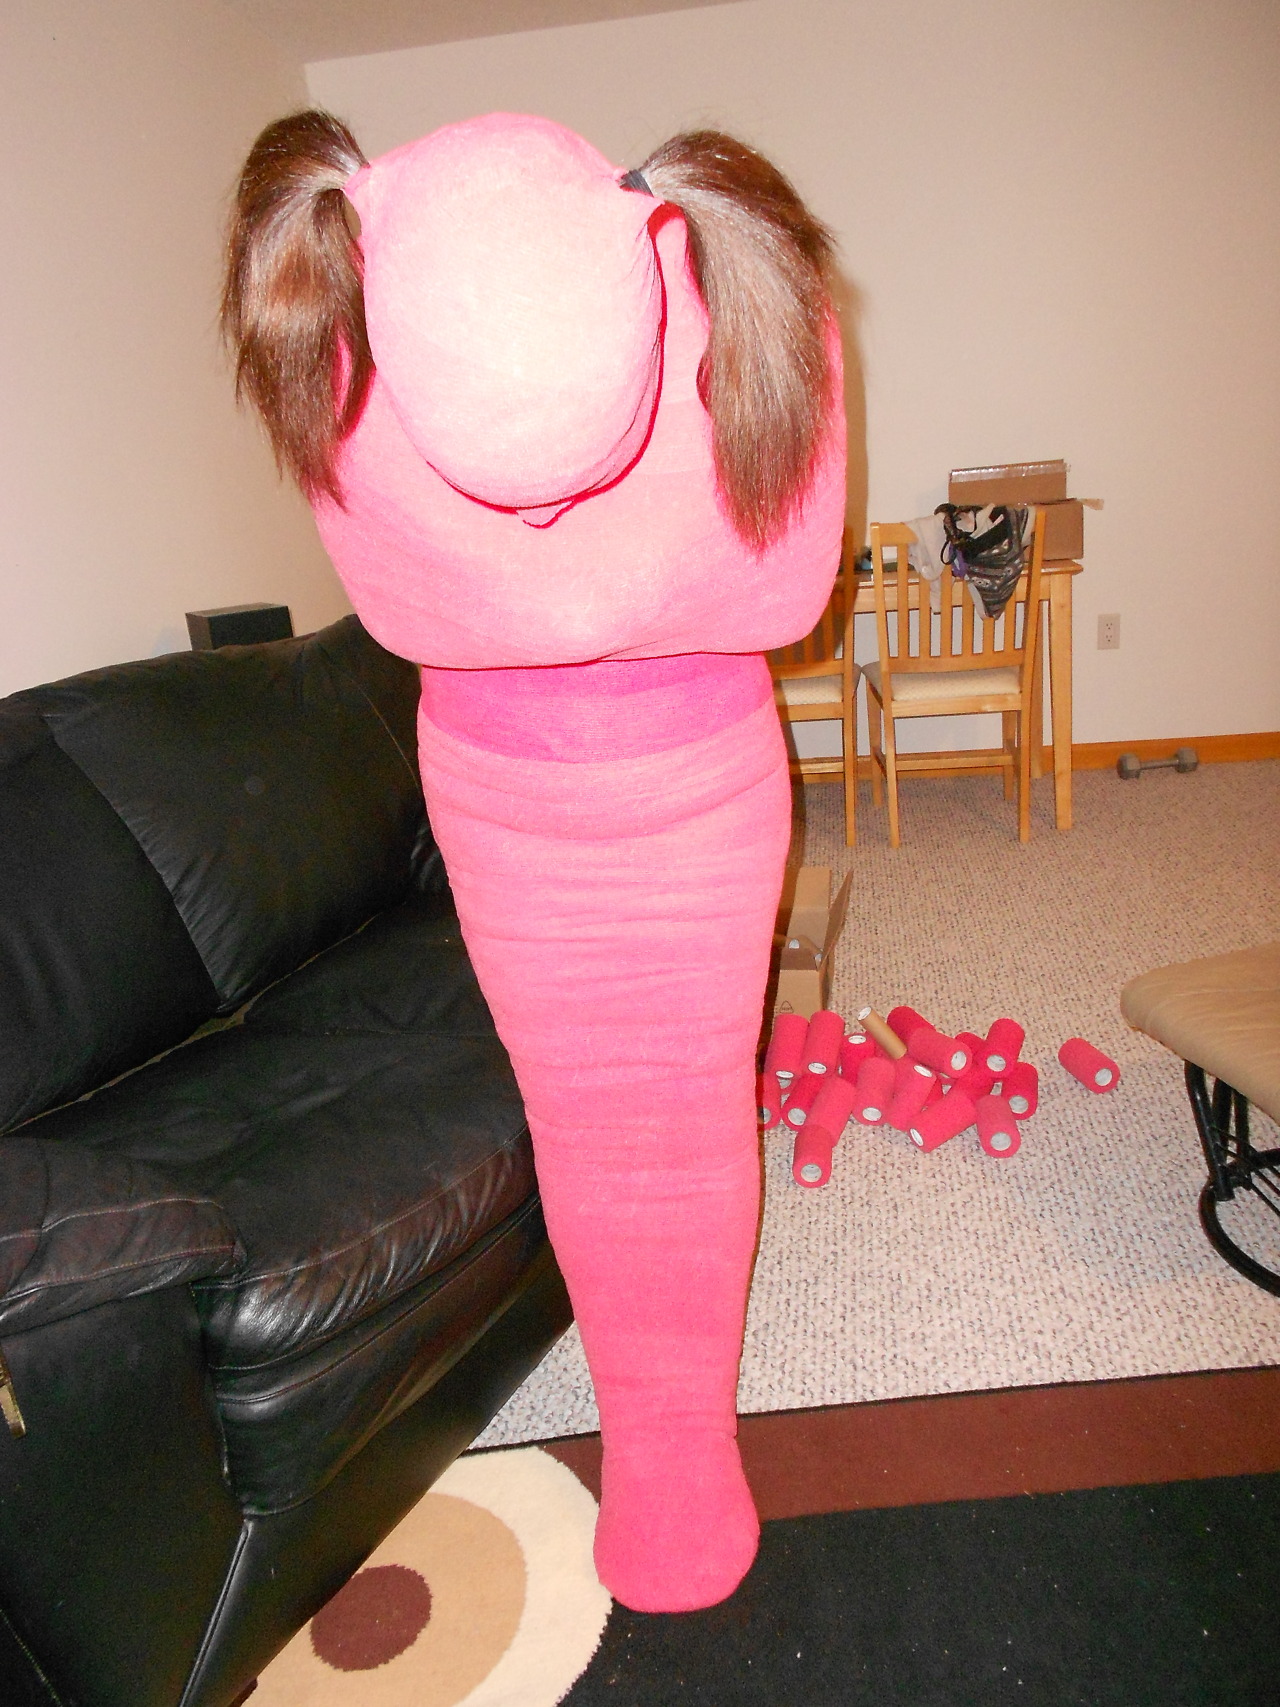 You’re looking very stylish in your pink mummification! Of course when it’s up